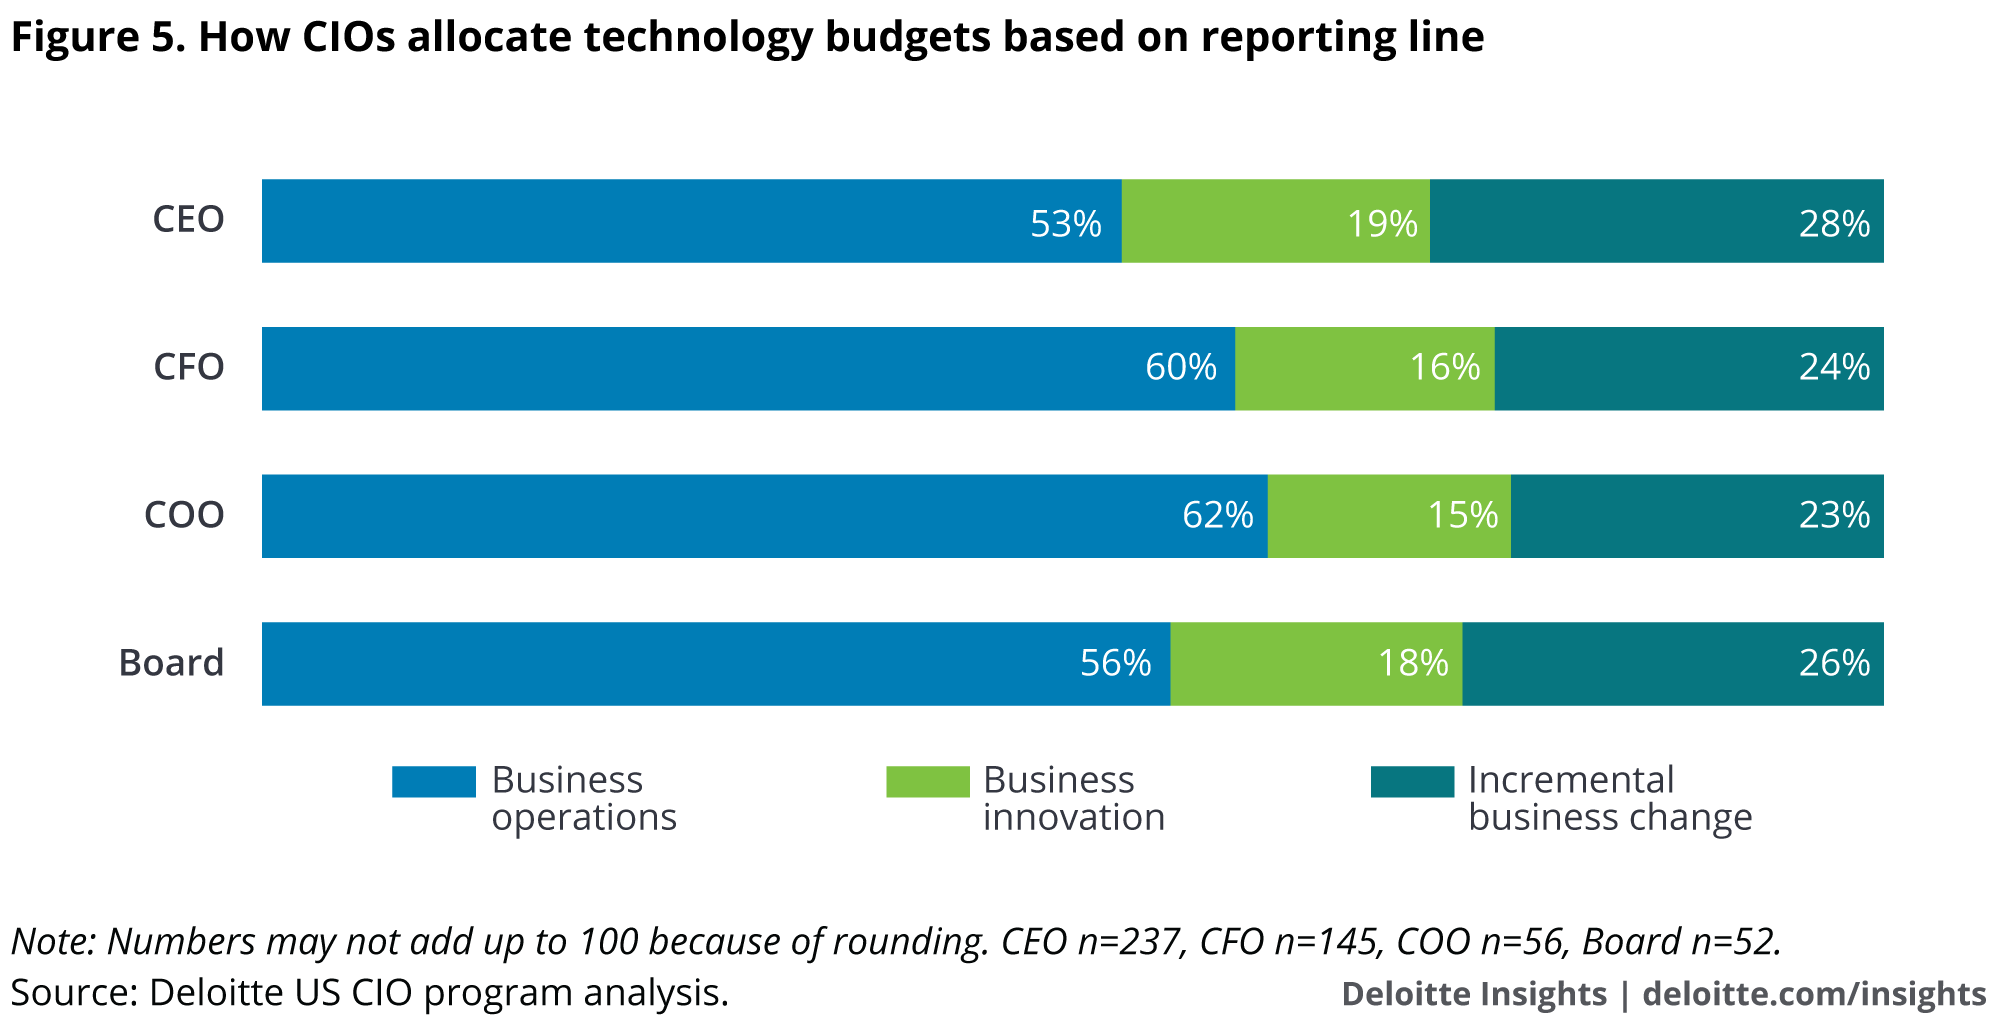 How CIOs allocate technology budgets based on reporting line